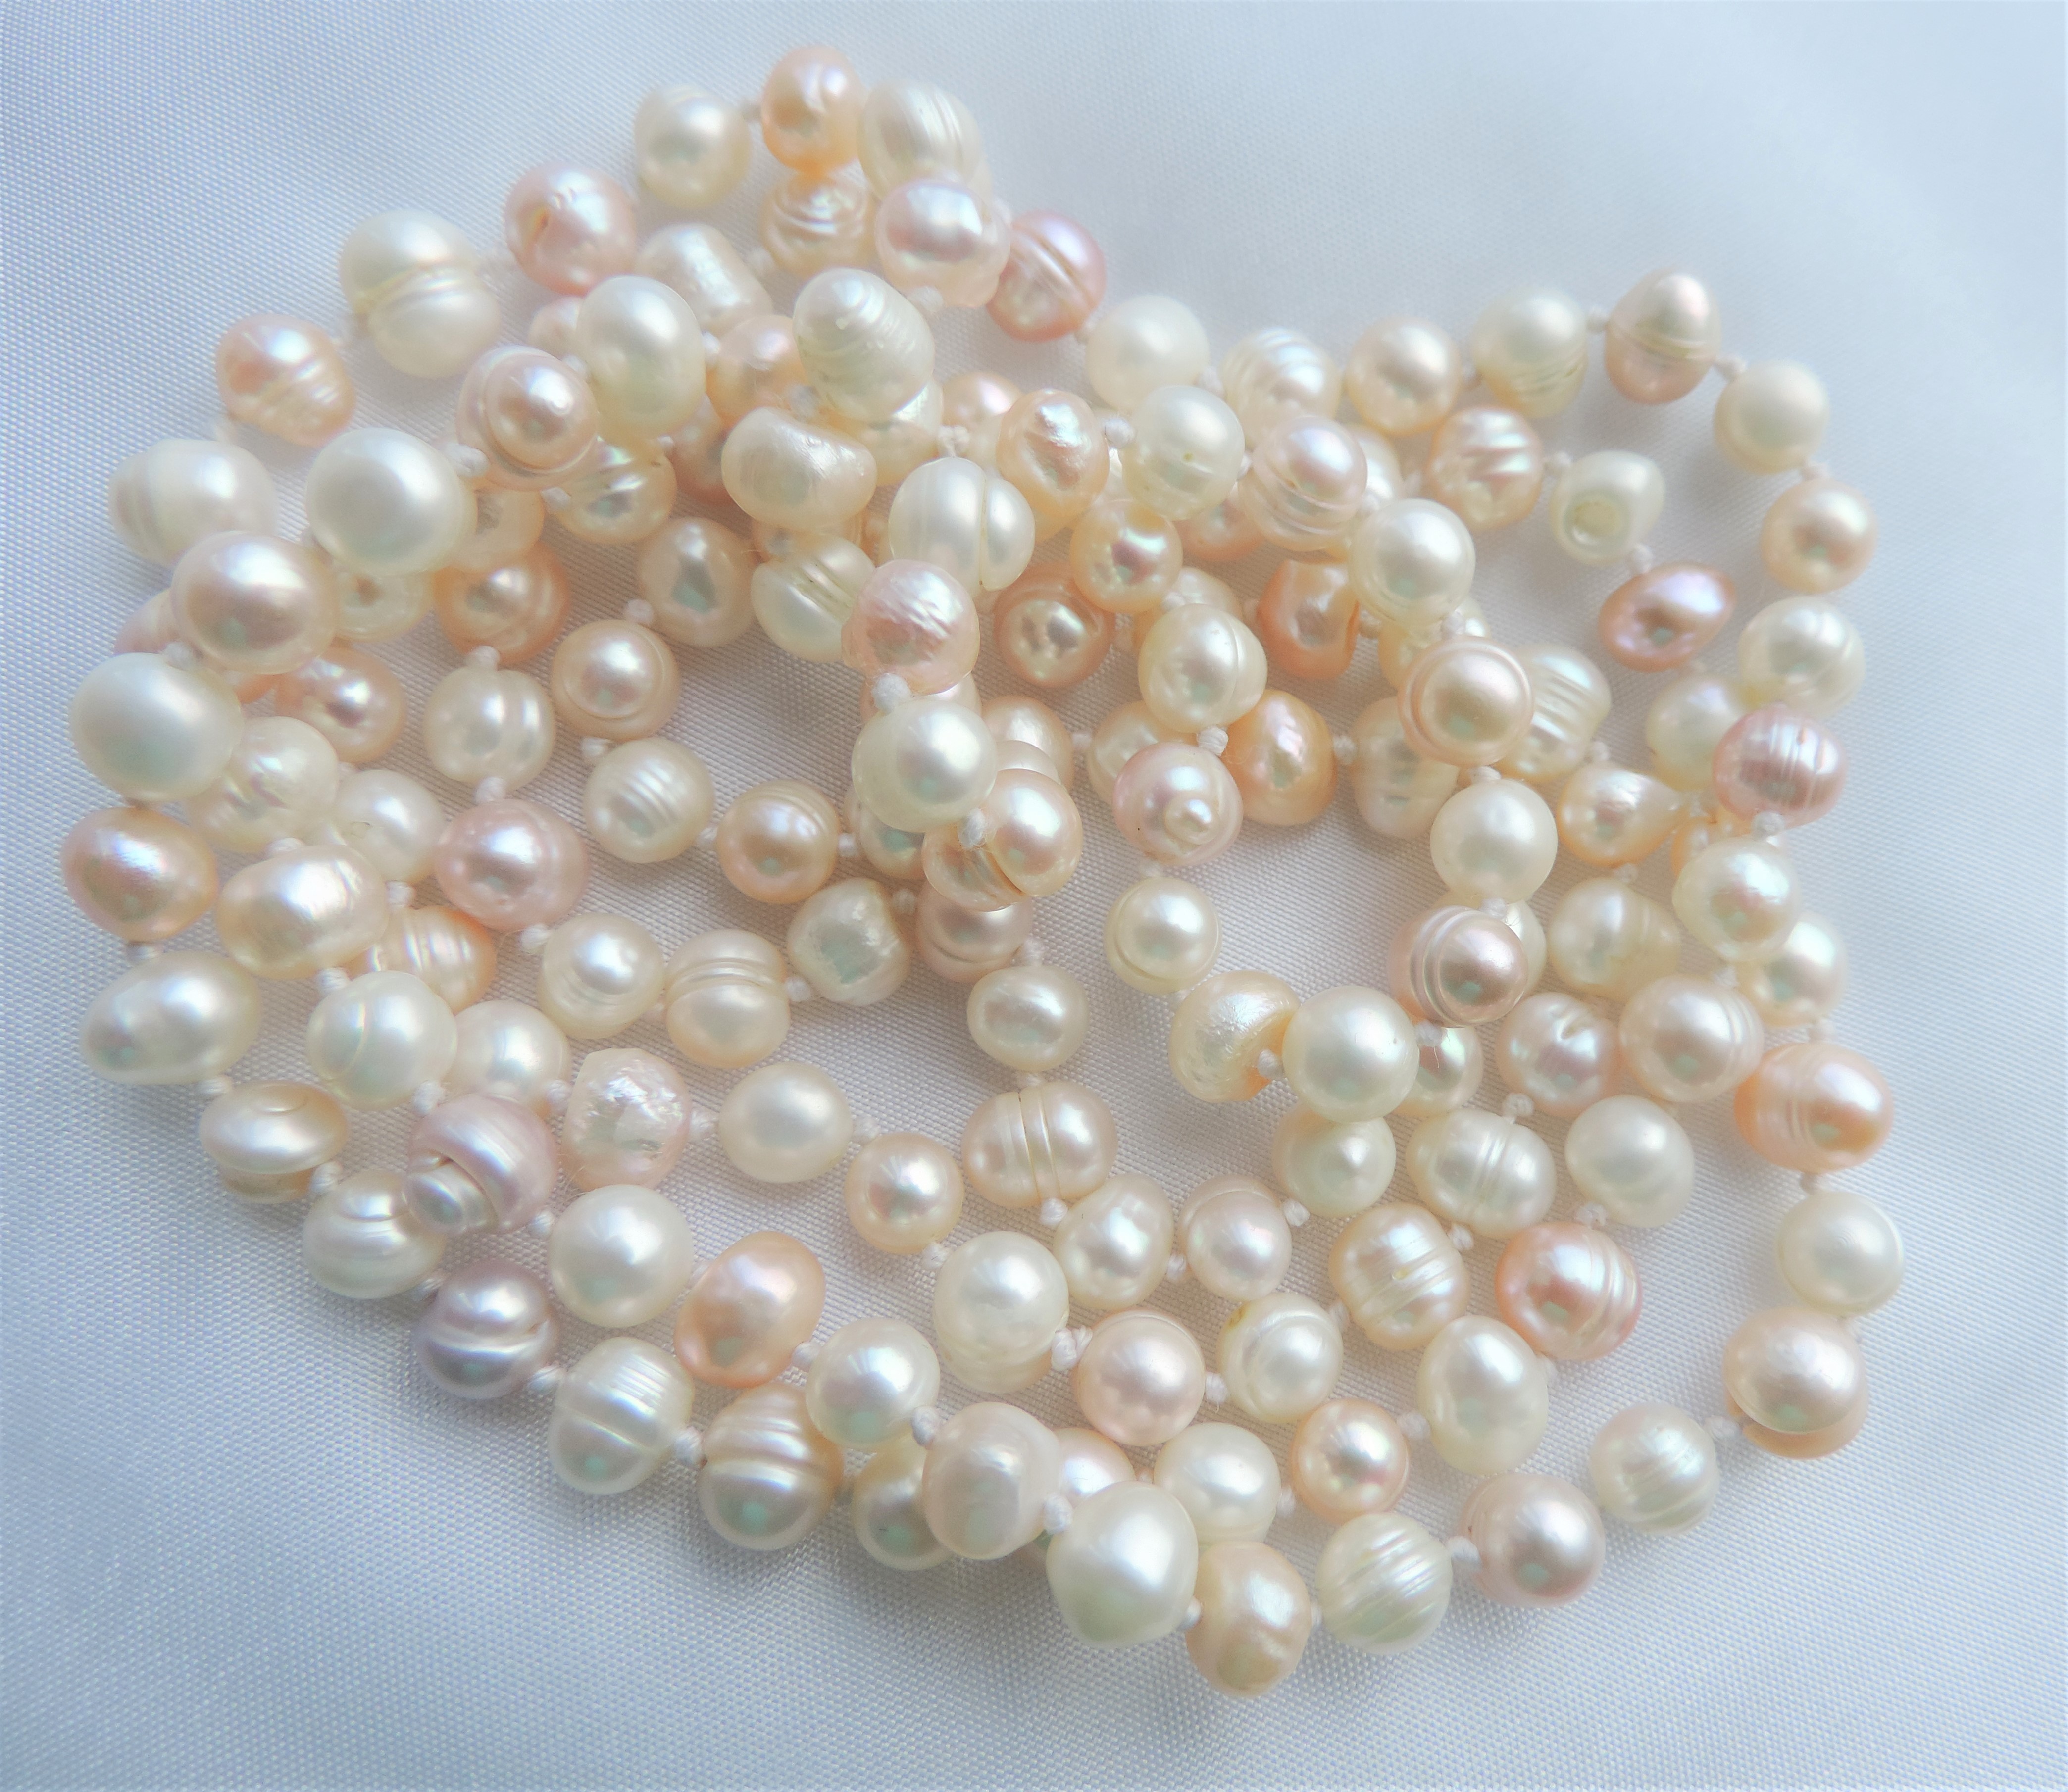 Cream, Pink & Peach Cultured Pearl Necklace 45 inches - Image 3 of 4